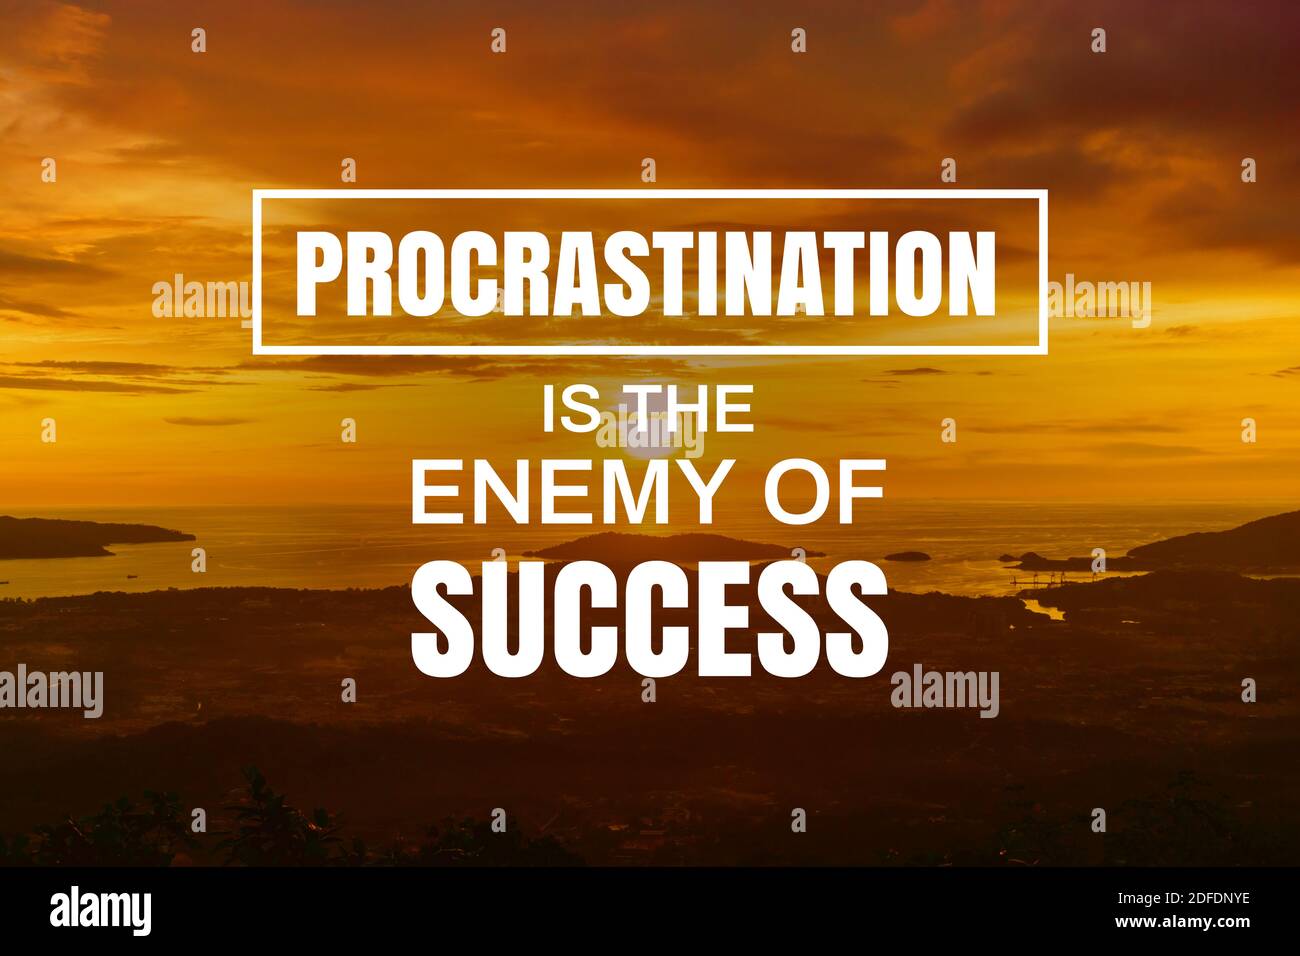 Inspirational and Motivational Quote. Procrastination is The Enemy of Success. Sunset Background. Stock Photo